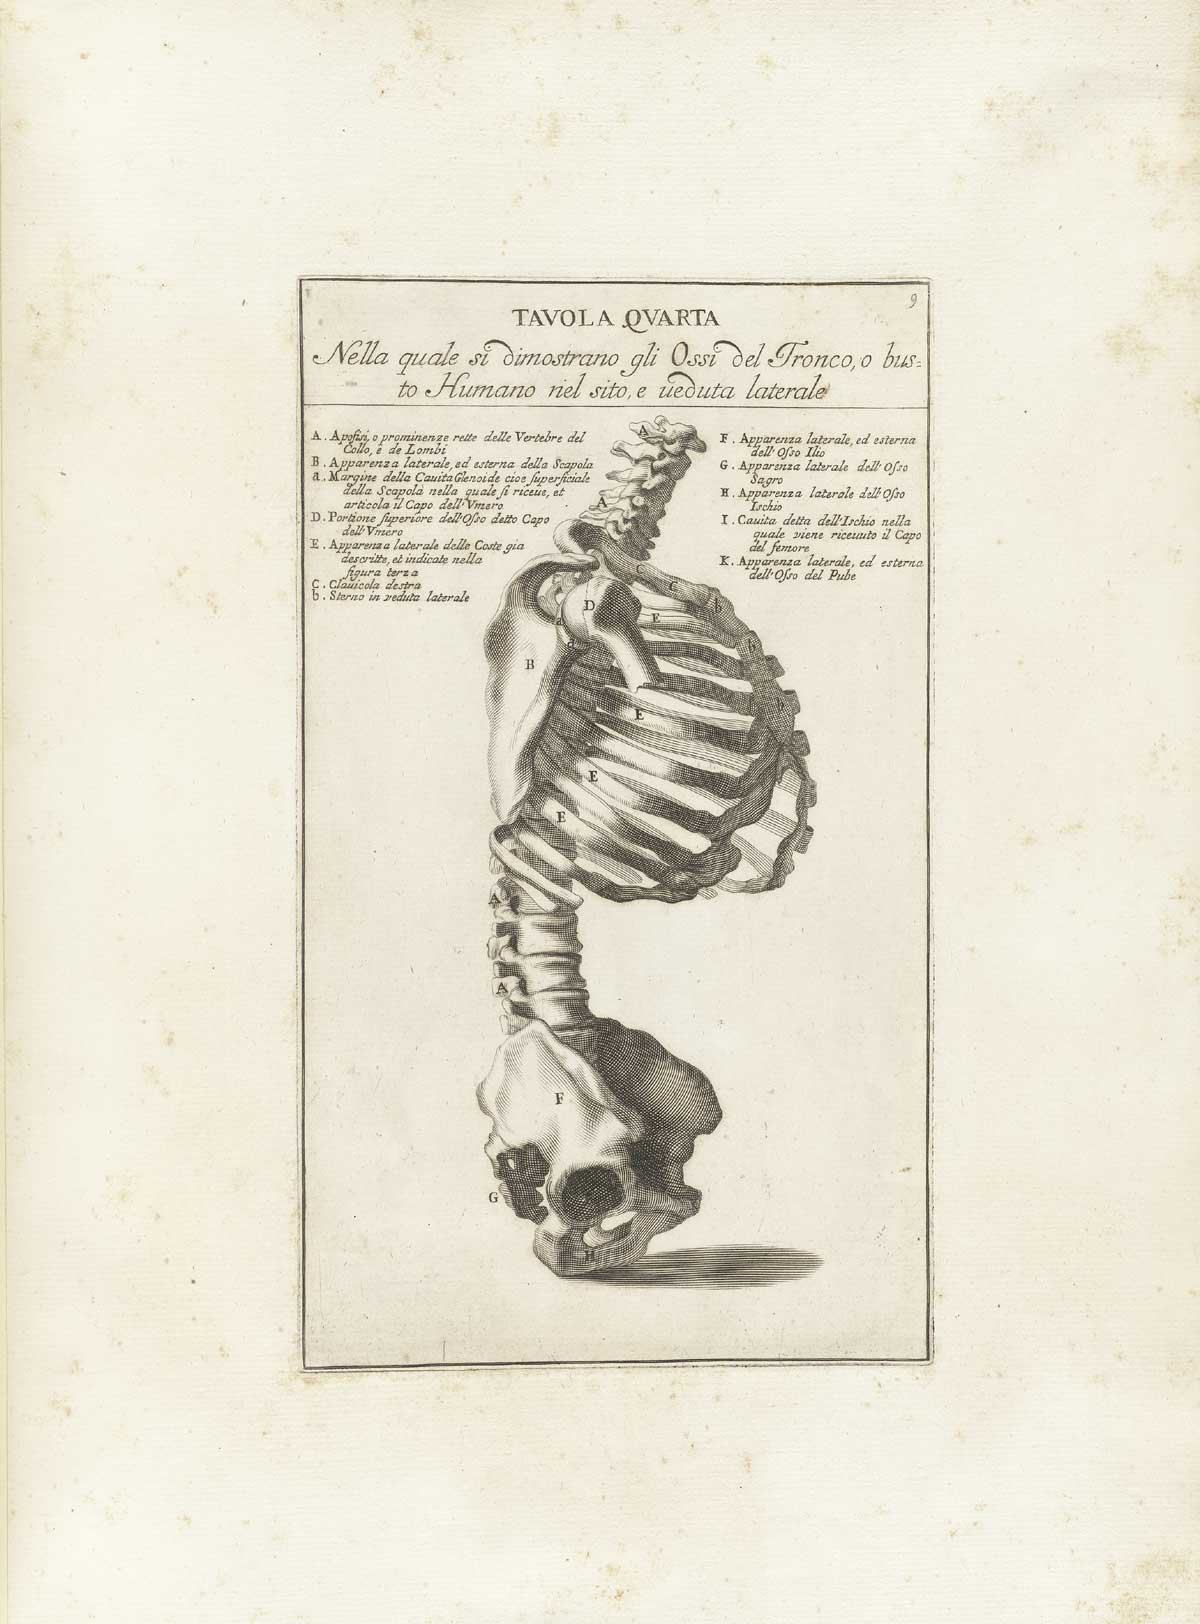 Engraving of a skeleton in profile without head or limbs, focusing on the ribcage, spinal column and pelvis; with explanatory text in Italian on either side of the figure at the top; from Bernardino Genga’s Anatomia per uso et intelligenza del disegno, NLM Call no.: WZ 250 G329an 1691.